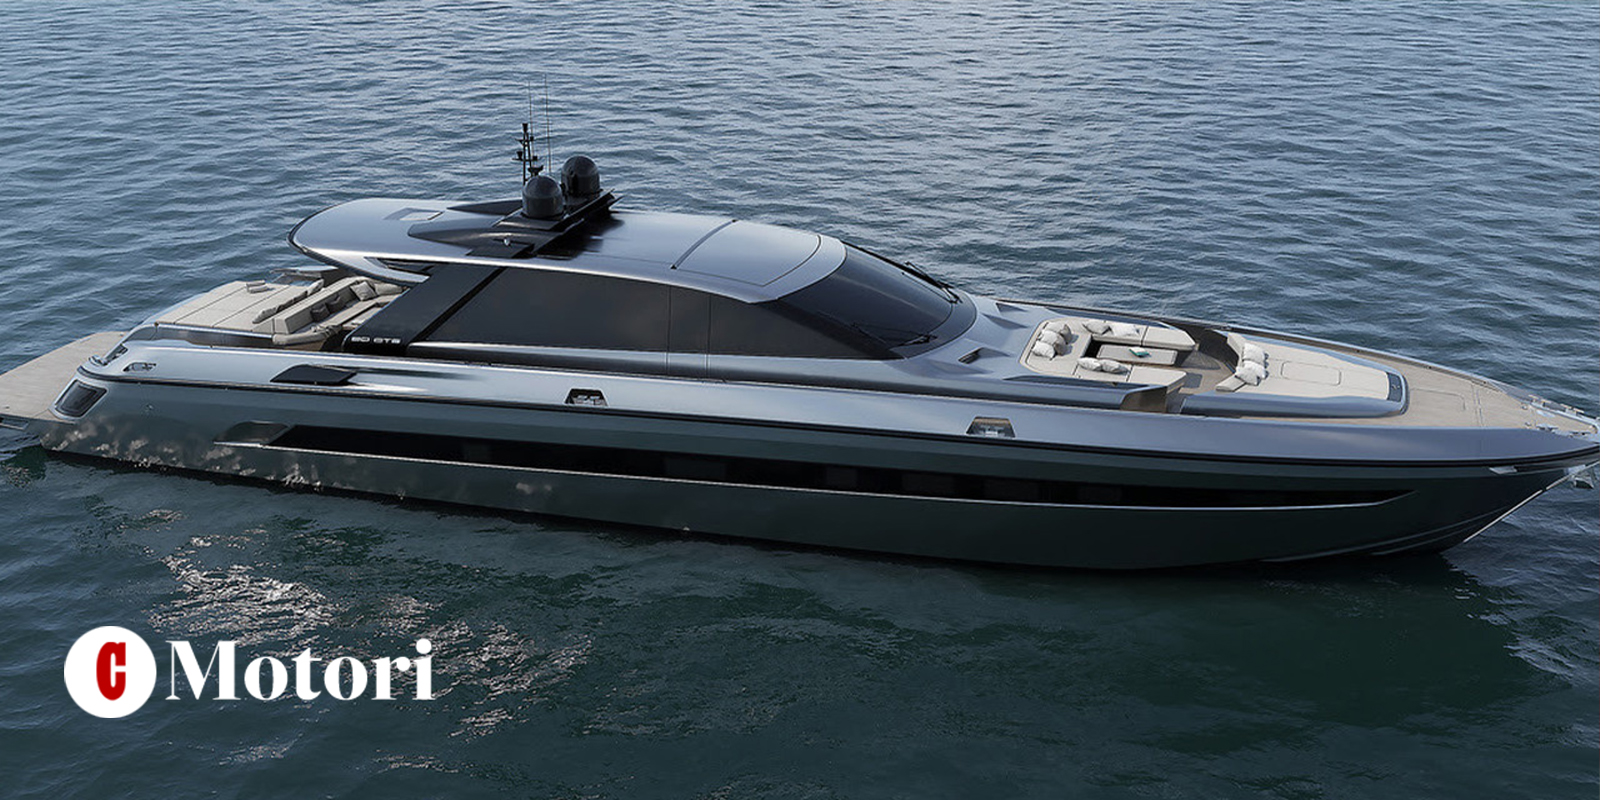 OTAM prepares the 70th anniversary with the new 90 GTS: launch in May, debut at the Cannes Boat Show in September